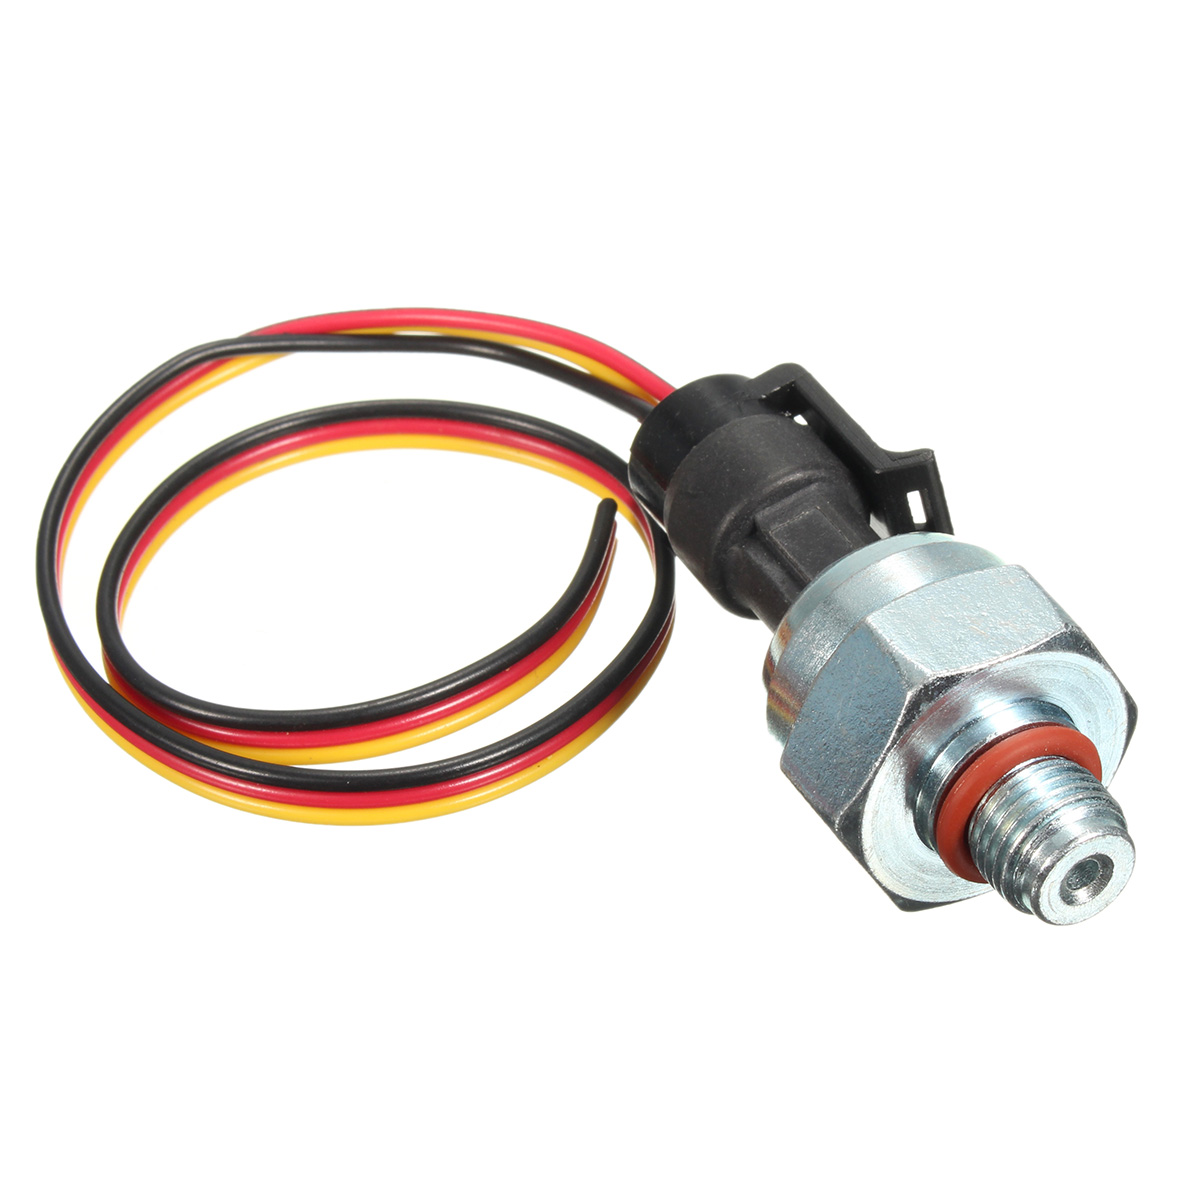 Powerstroke-Oil-Injection-Control-Pressure-Sensor-With-Connector-Kit-For-Ford-E-350-450-550-F750-1373350-4